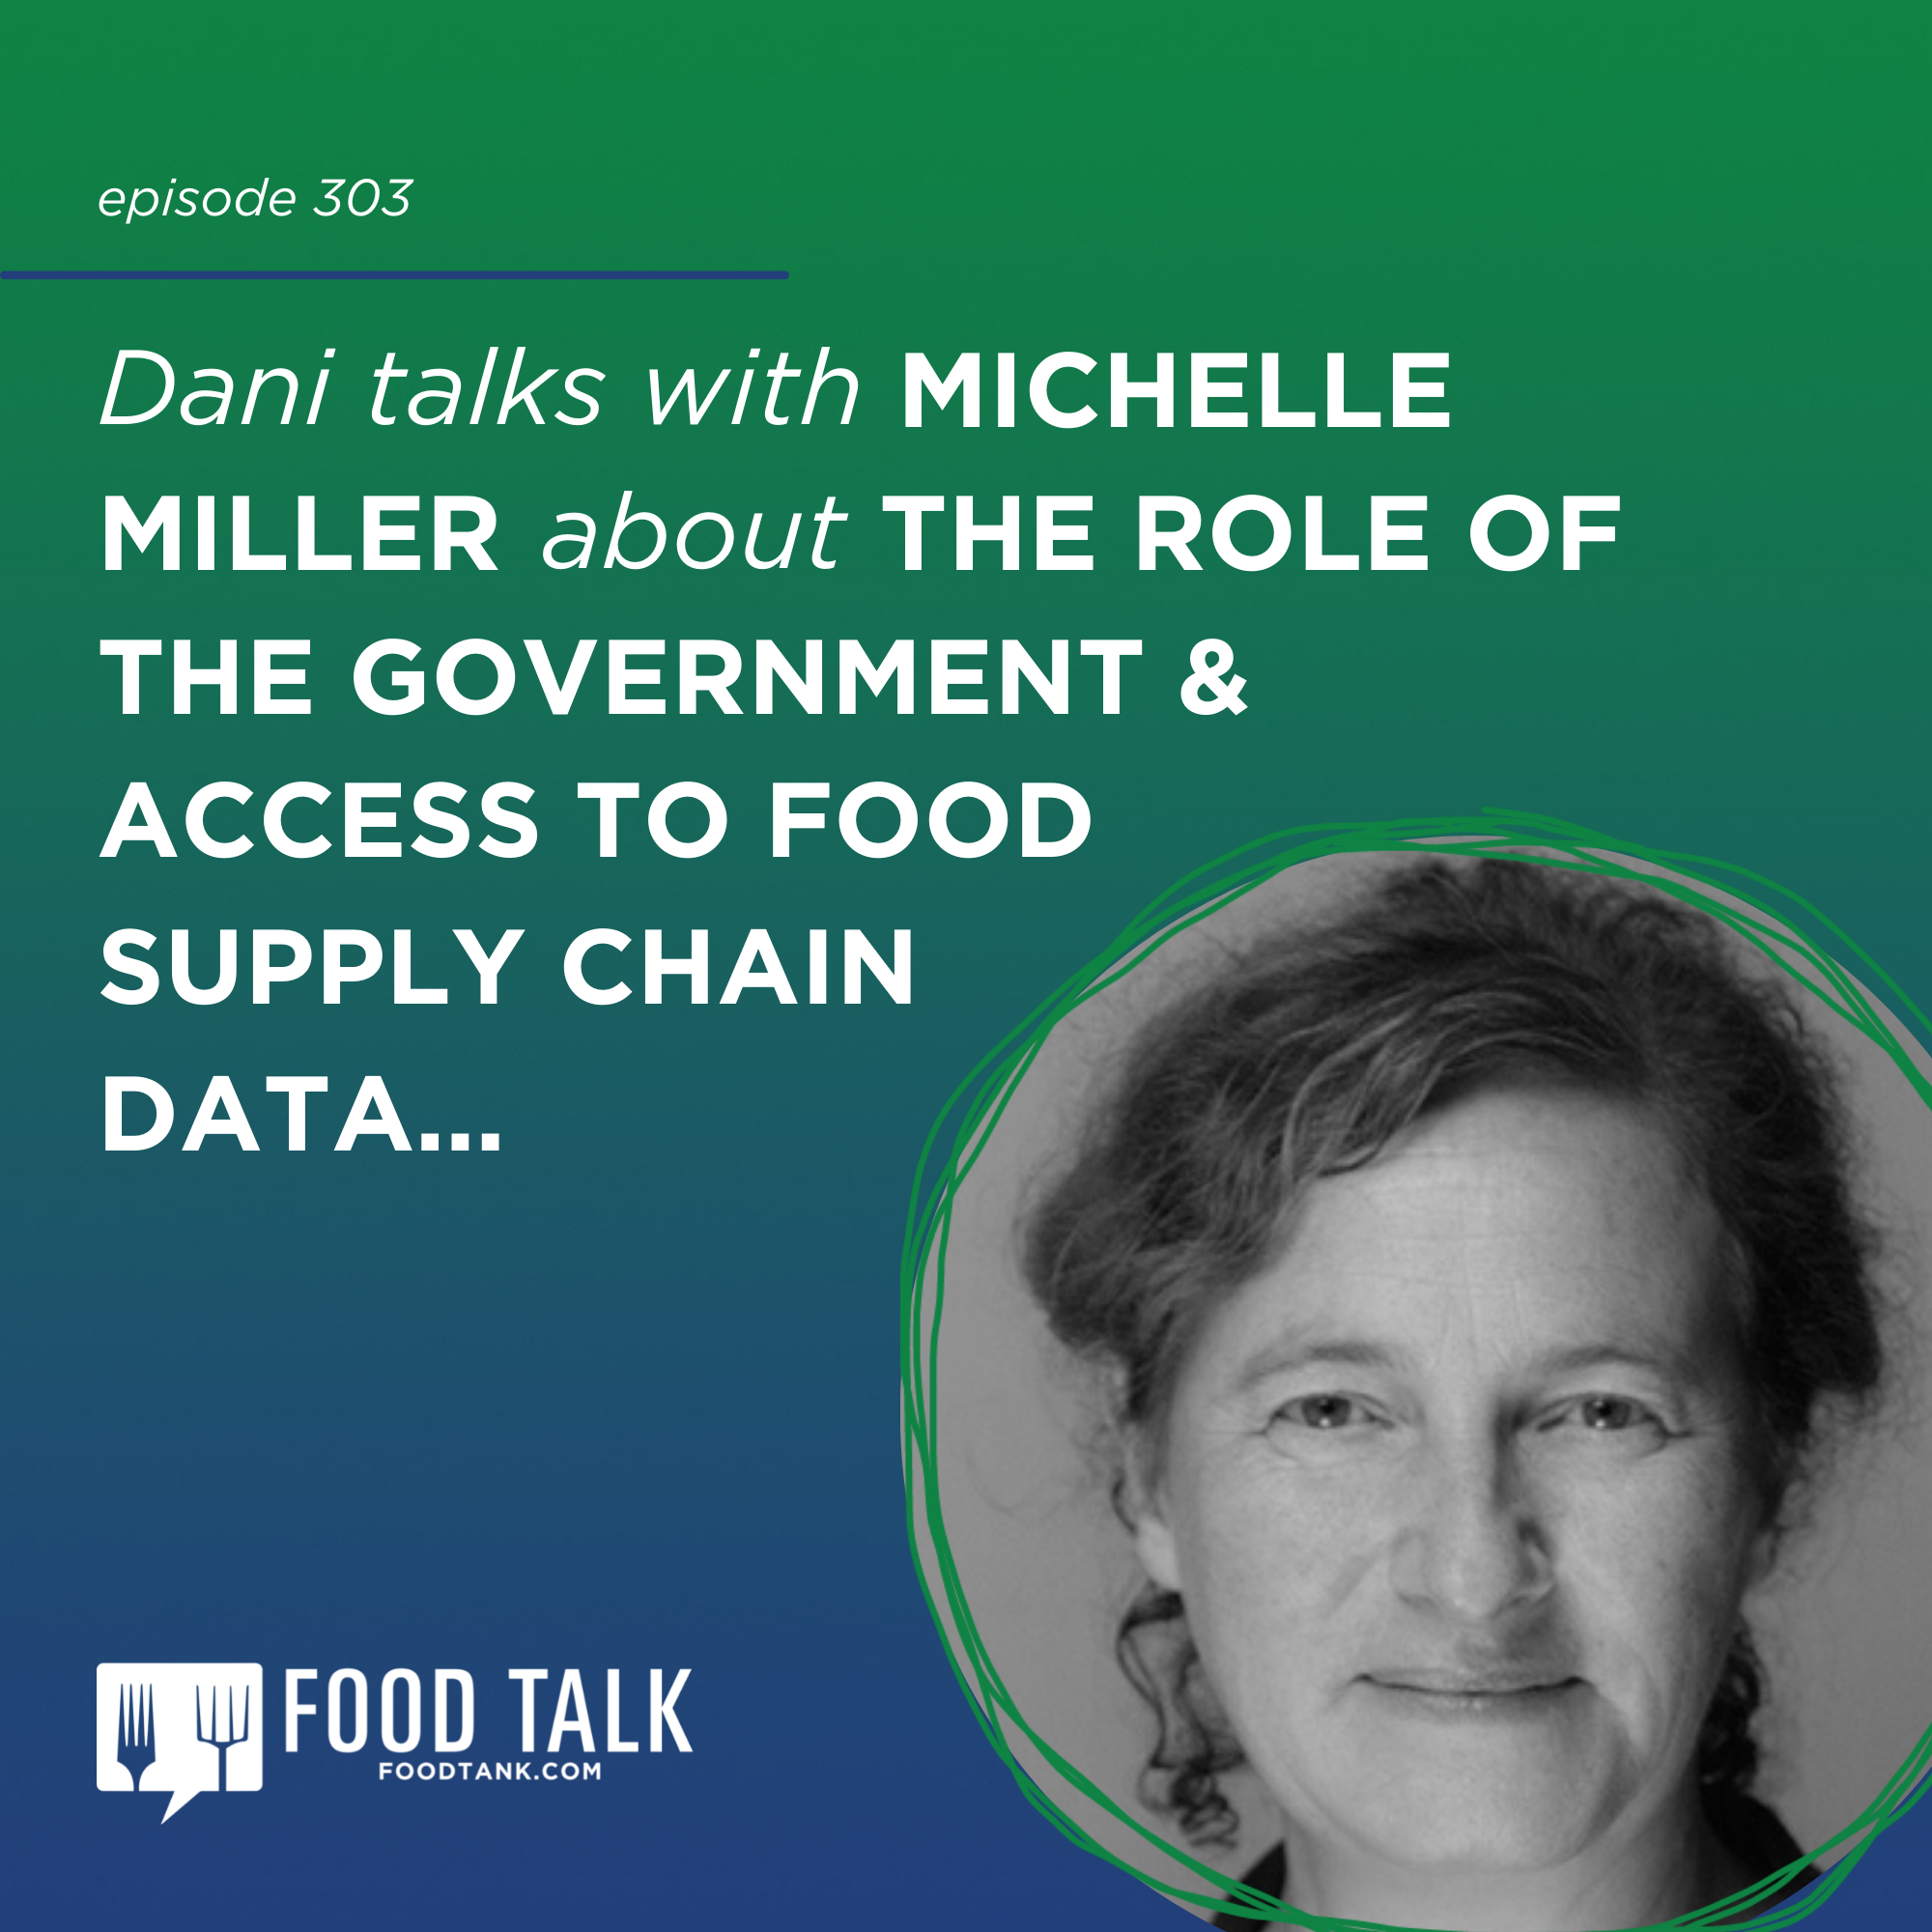 https://podcasts.apple.com/us/podcast/303-michelle-miller-talks-about-ensuring-equitable/id1434128568?i=1000550652250